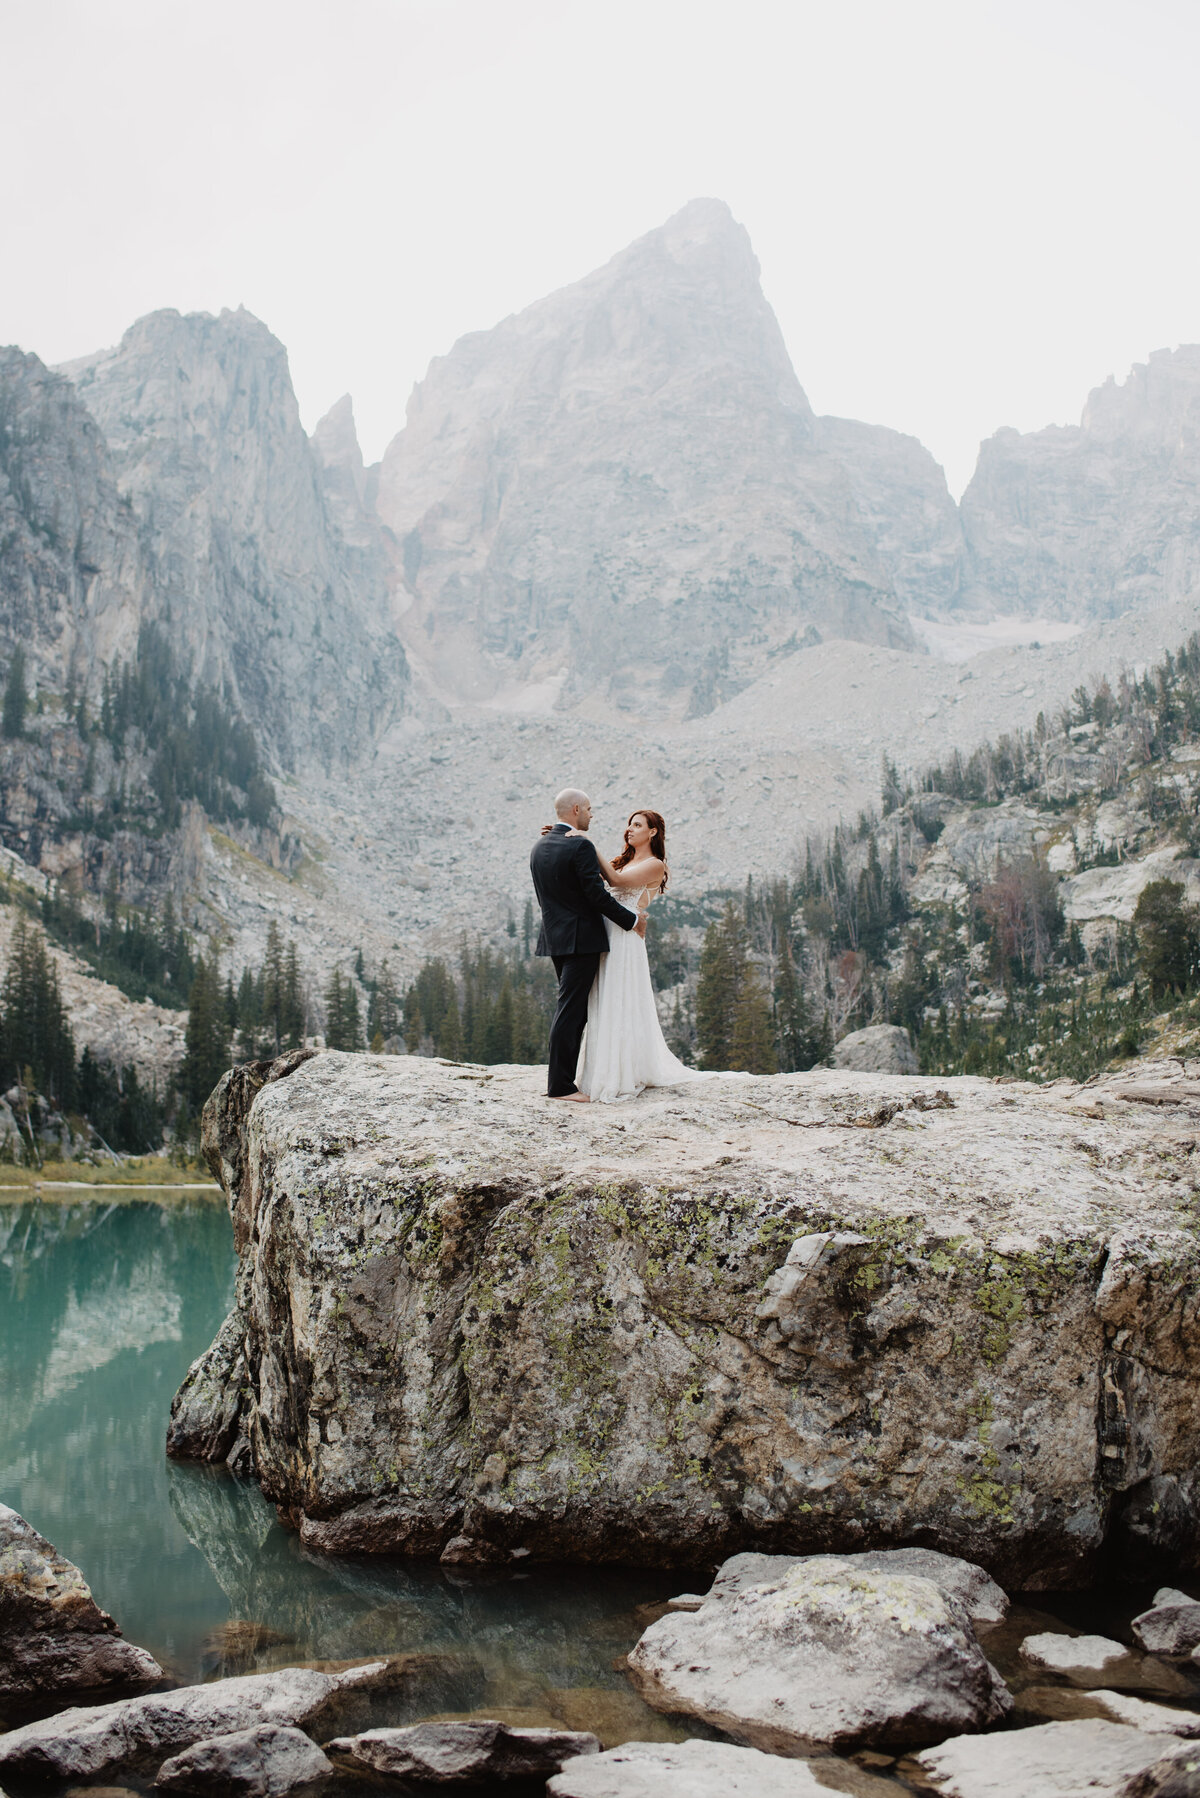 Jackson Hole photographers capture bride and groom laughing together